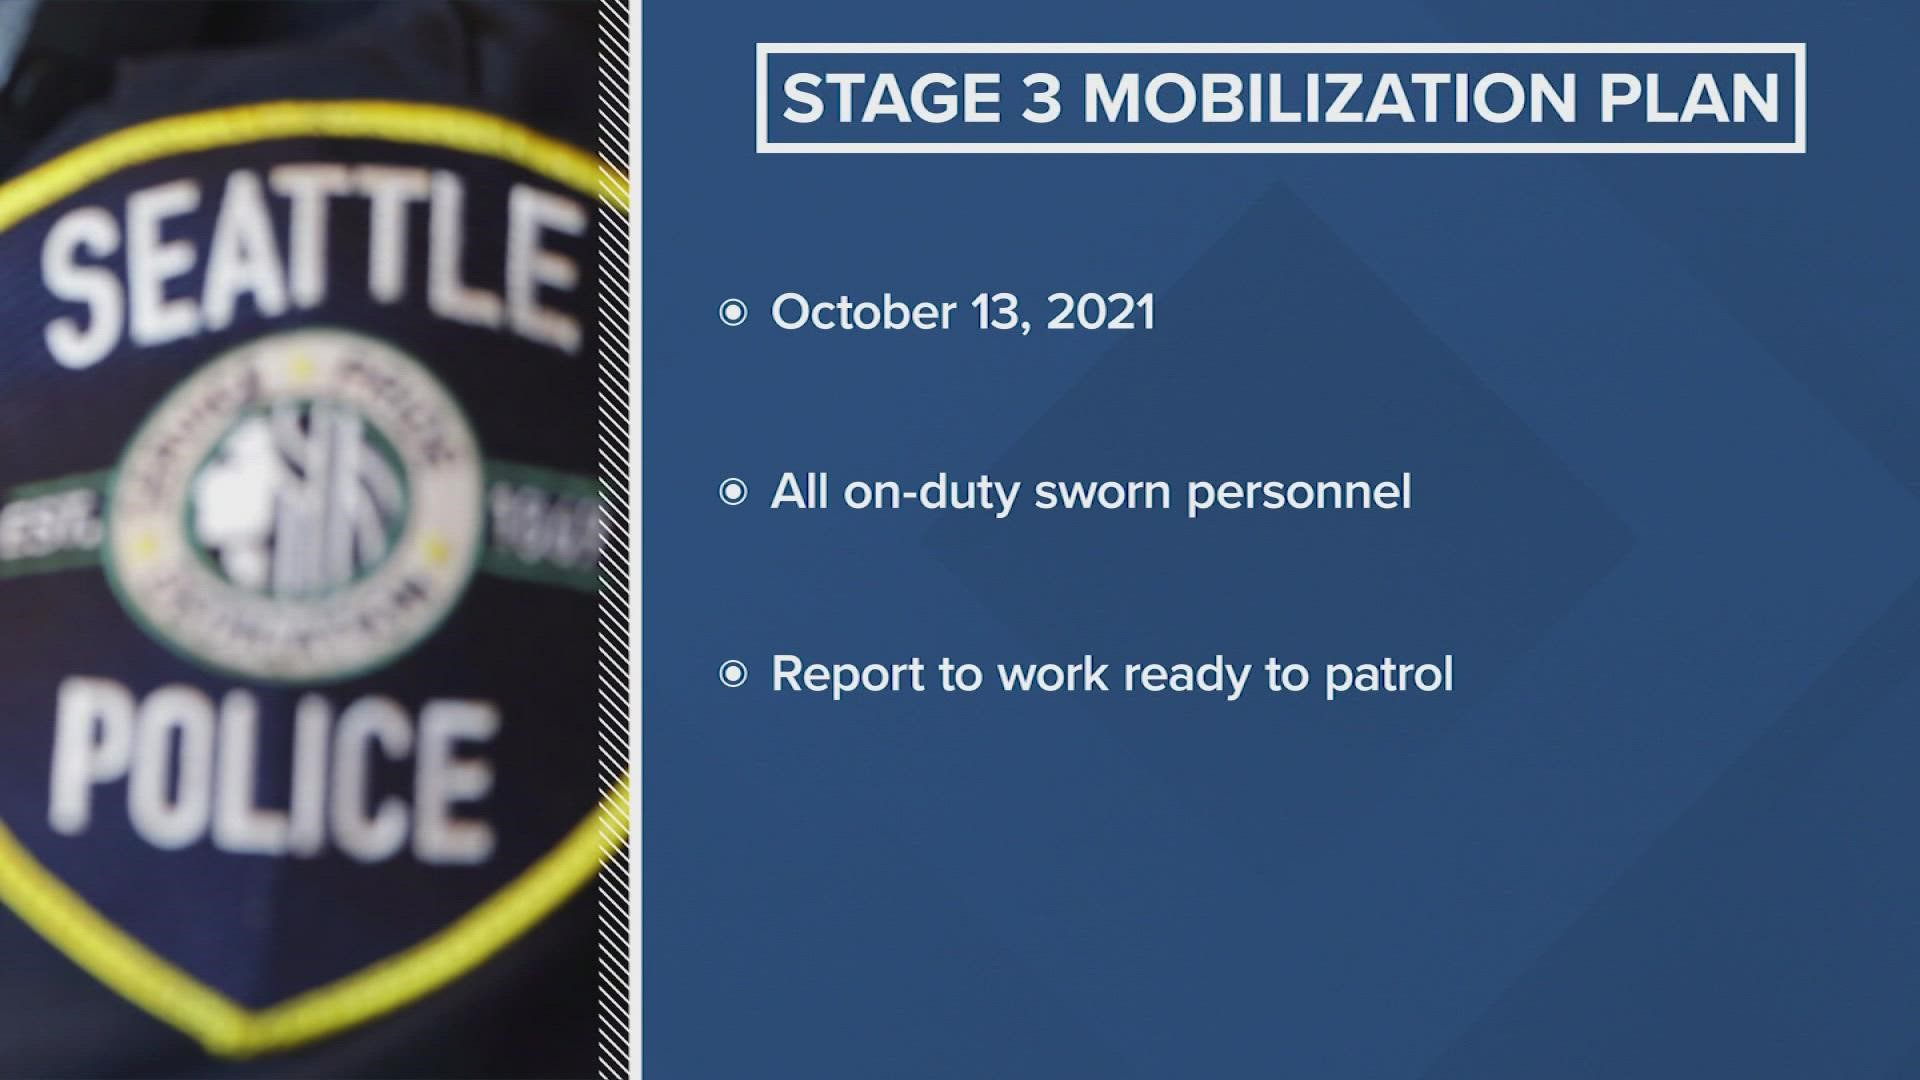 An emergency stage three mobilization plan is now in effect for the Seattle Police Department amid concerns over staffing shortages and emergency response times.